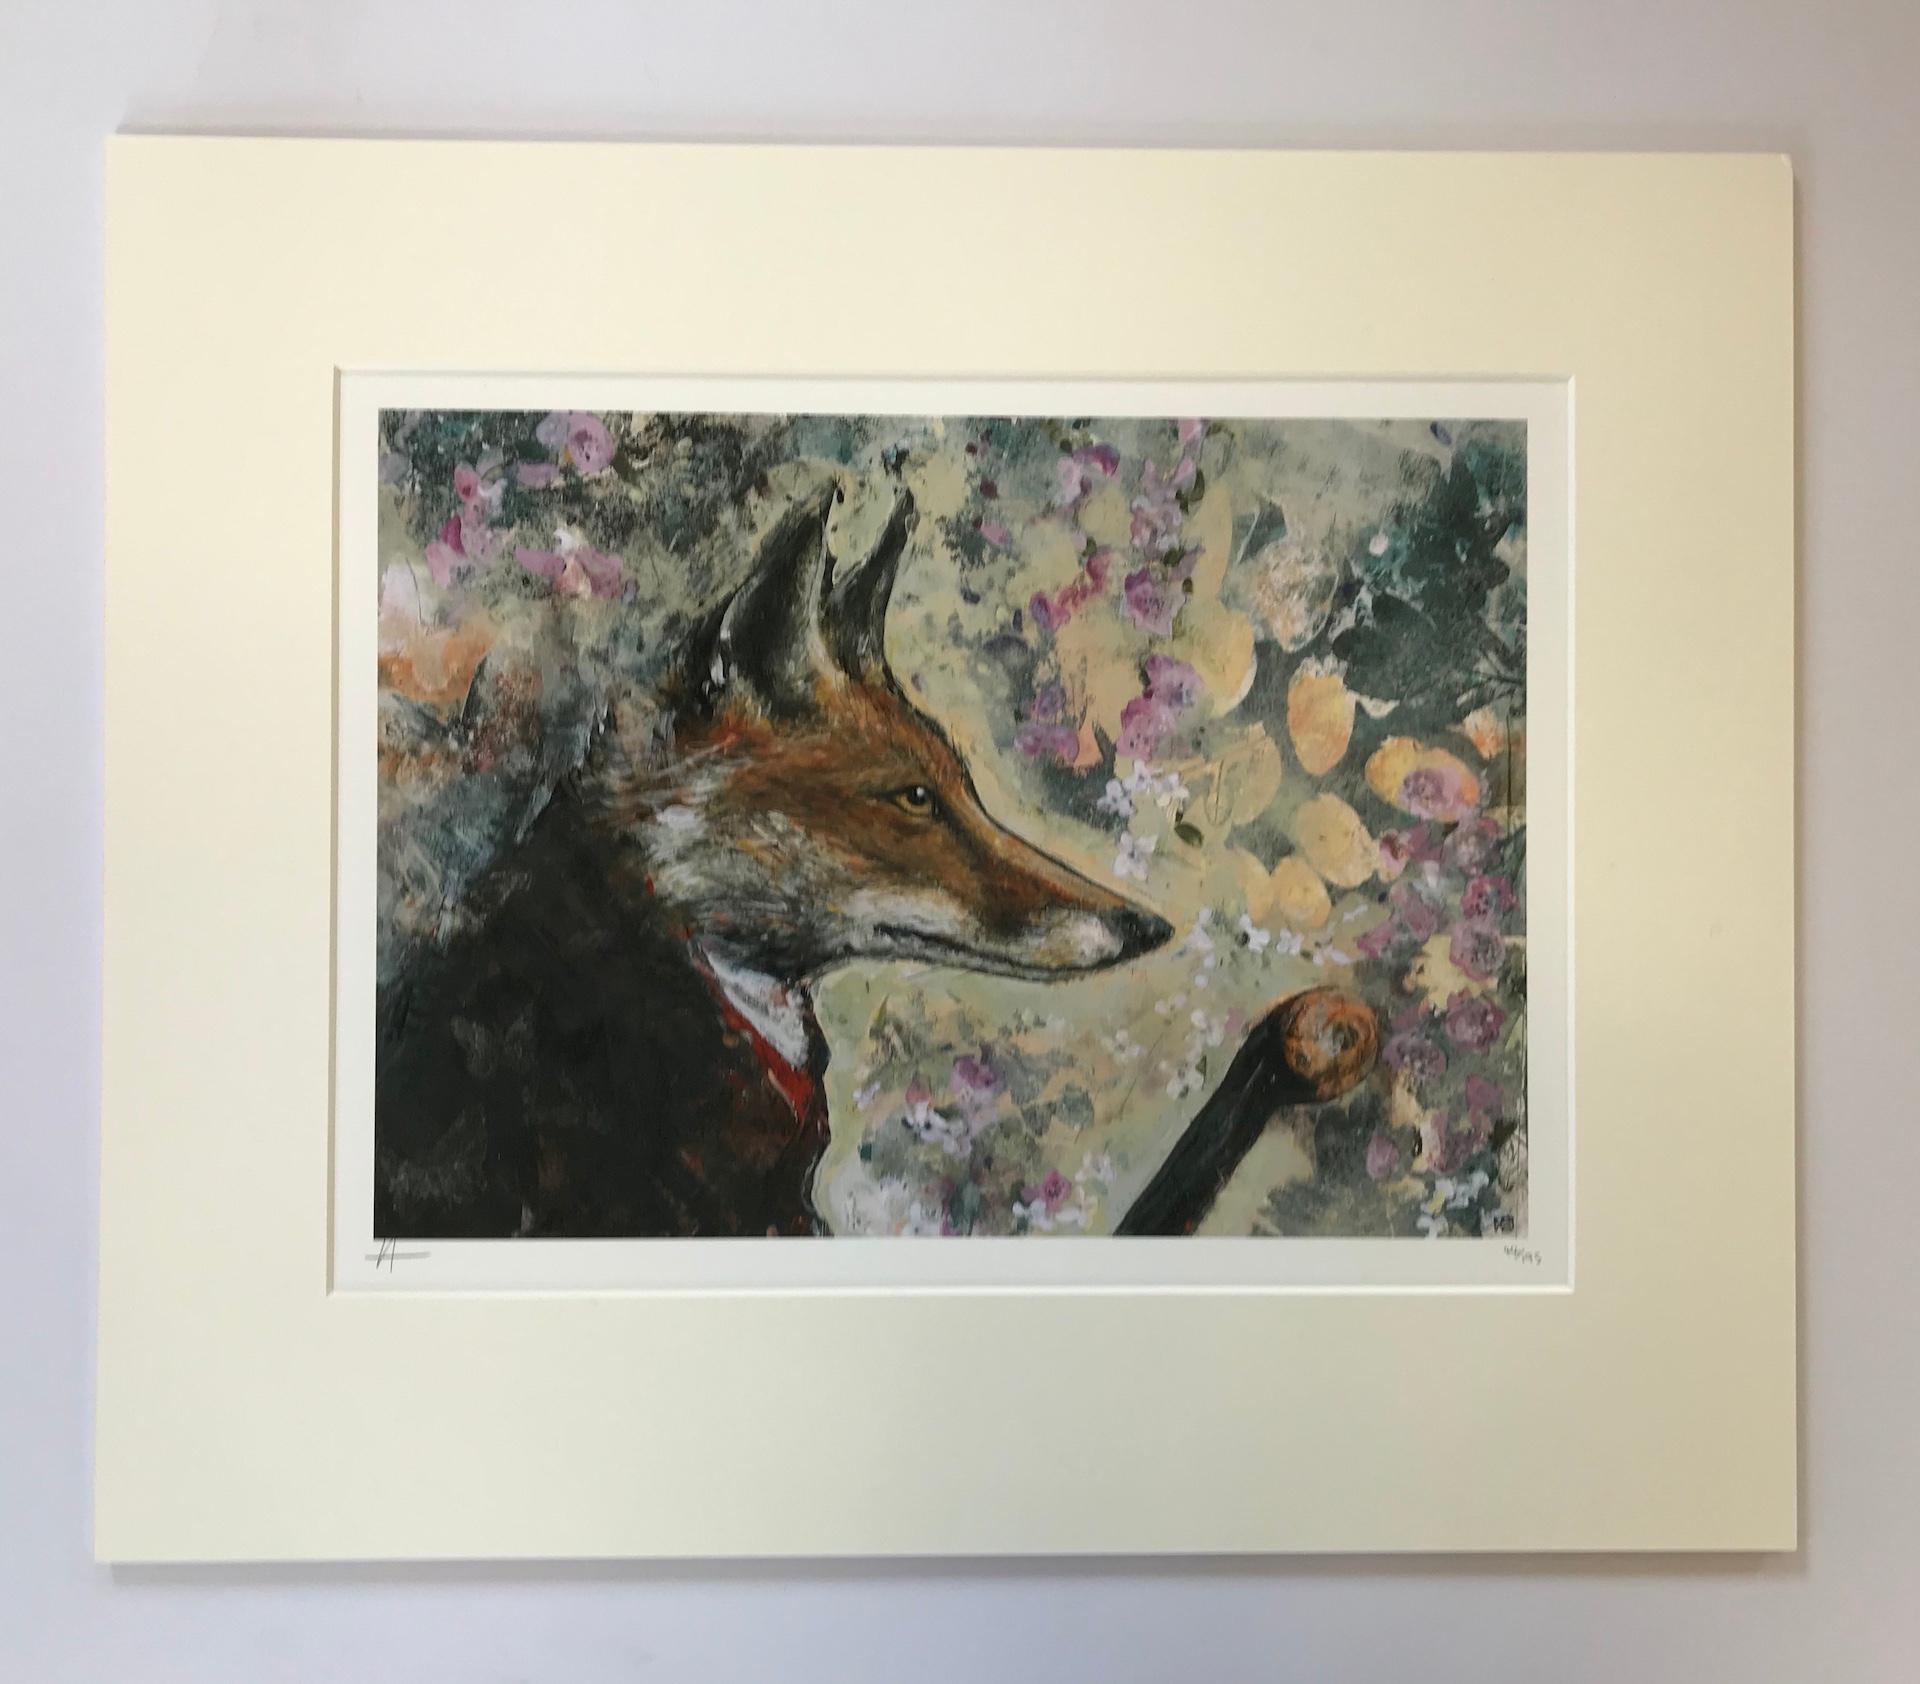 Harry Bunce
Limited Edition Print
Edition of 195
Mount Size: H 43cm x W 51cm
Signed and Numbered
Sold Unframed but Mounted
Please note that all in situ images are purely an indication of how a piece may look.

Arrival is a limited edition print by